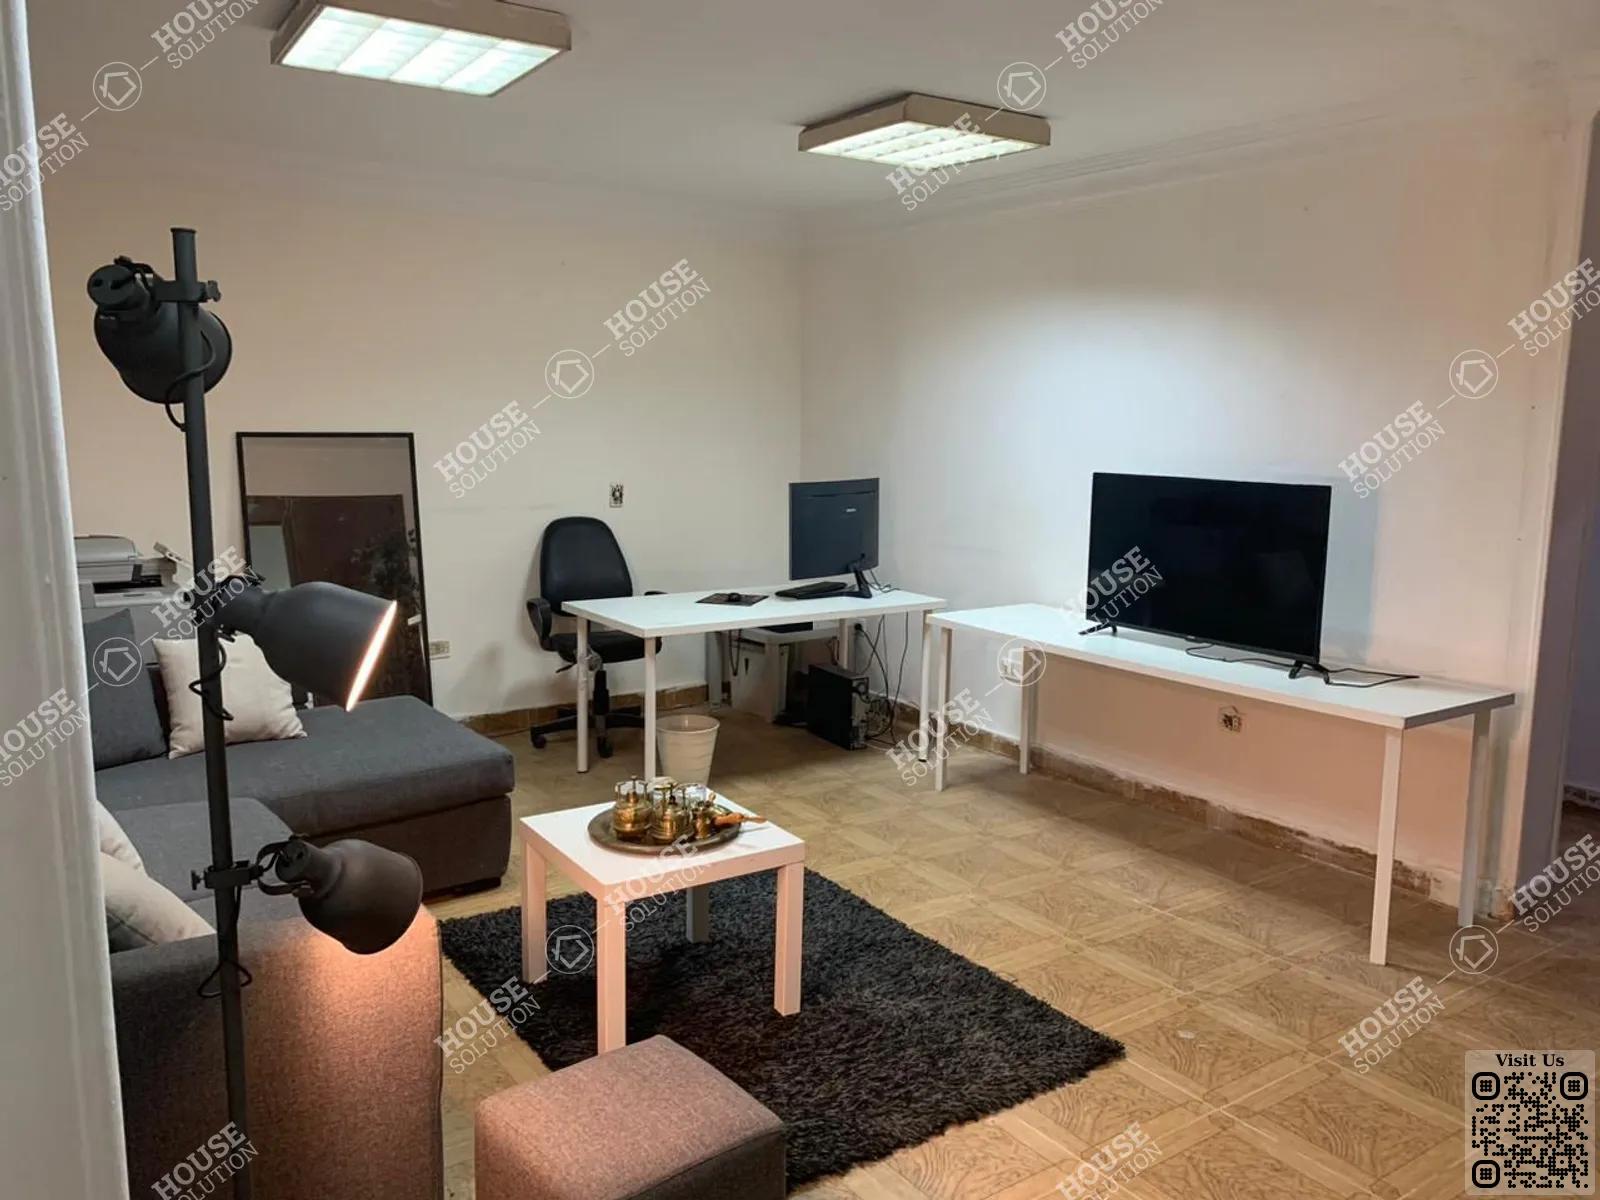 RECEPTION  @ Office spaces For Rent In Maadi New Maadi Area: 110 m² consists of 2 Bedrooms 1 Bathrooms Semi furnished 3 stars #5691-0